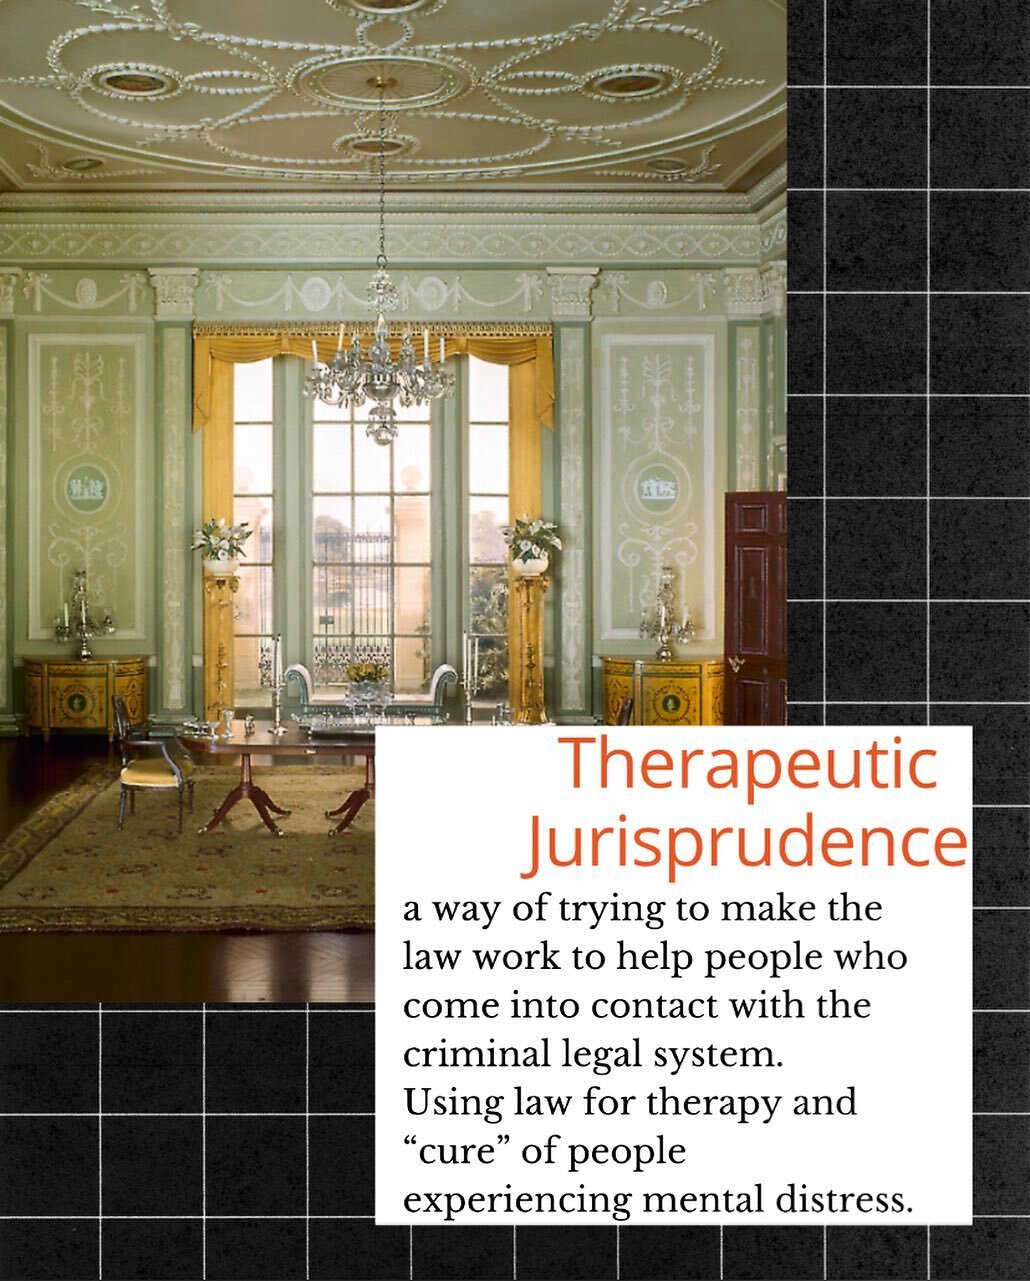 Therapeutic Jurisprudence proposes that Judges aren't just there to judge and decide, but to make a difference. 

To put it another way, therapeutic jurisprudence is a way to think about and do legal work that aims not only to use law to solve proble